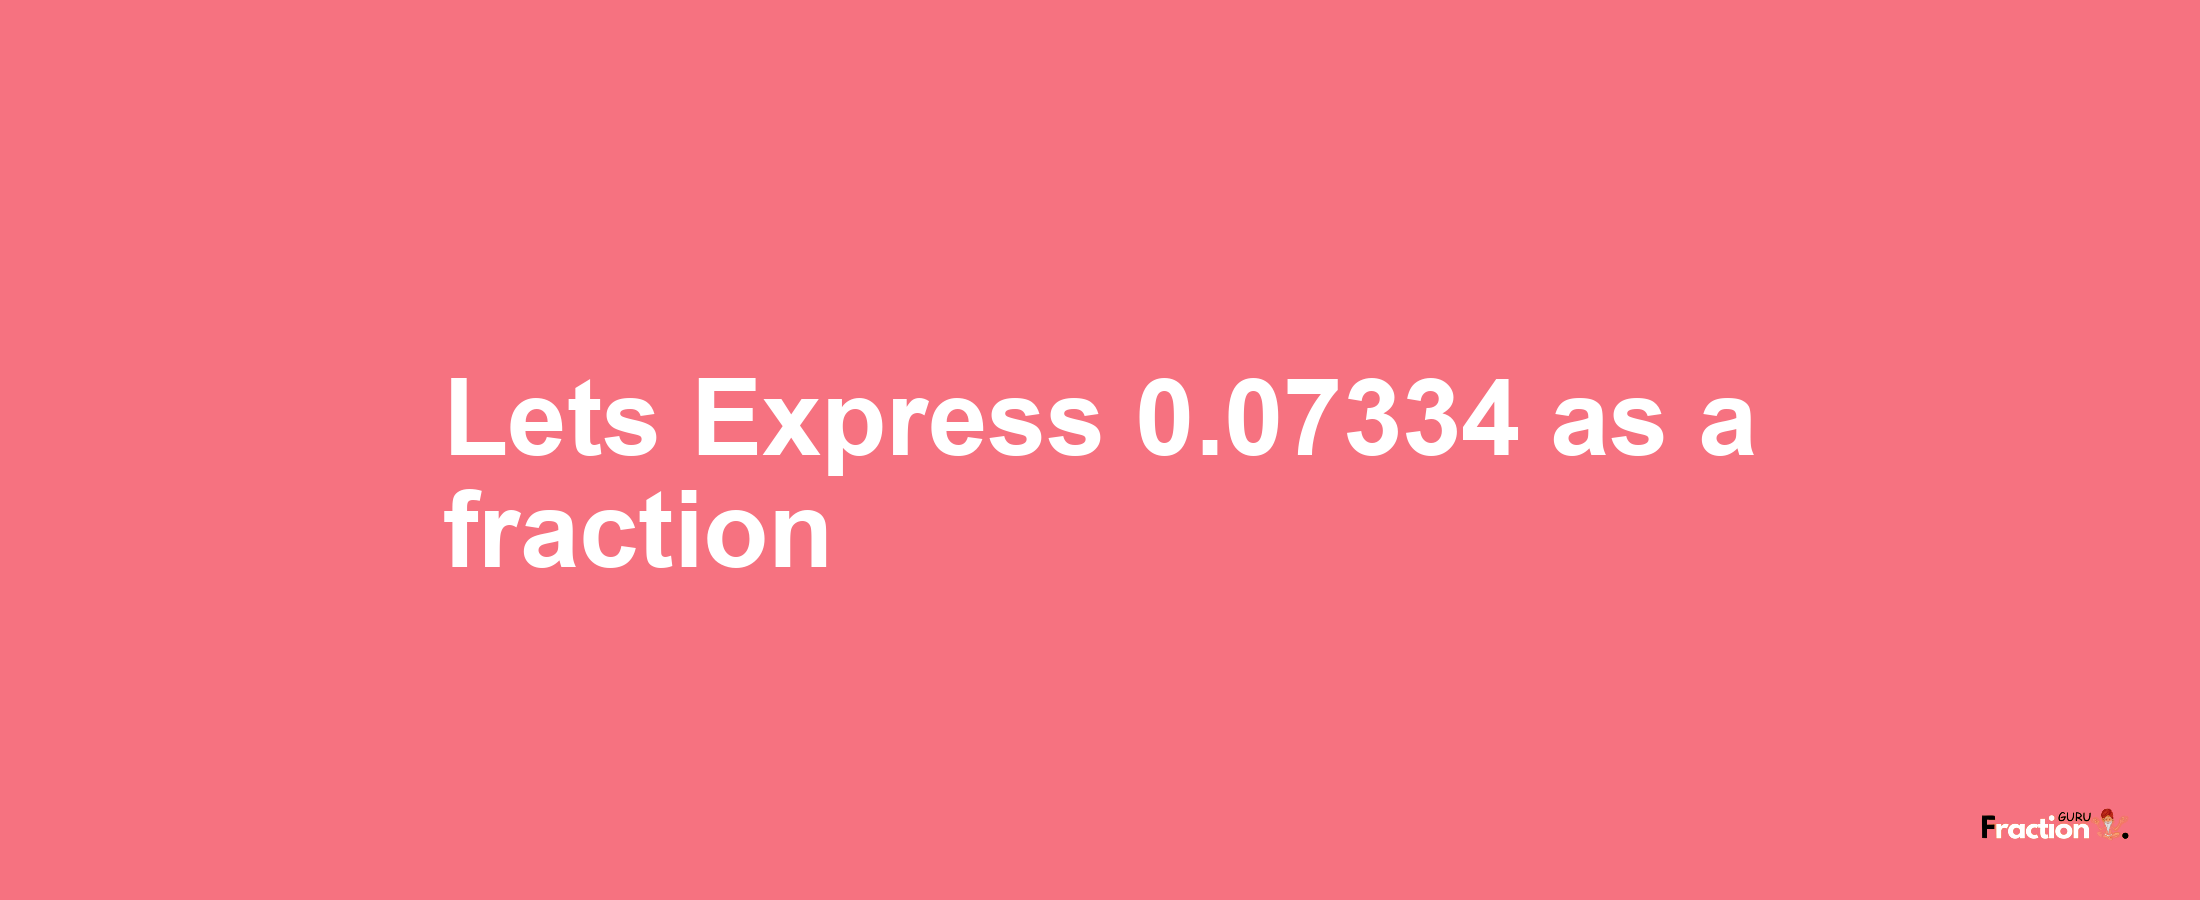 Lets Express 0.07334 as afraction